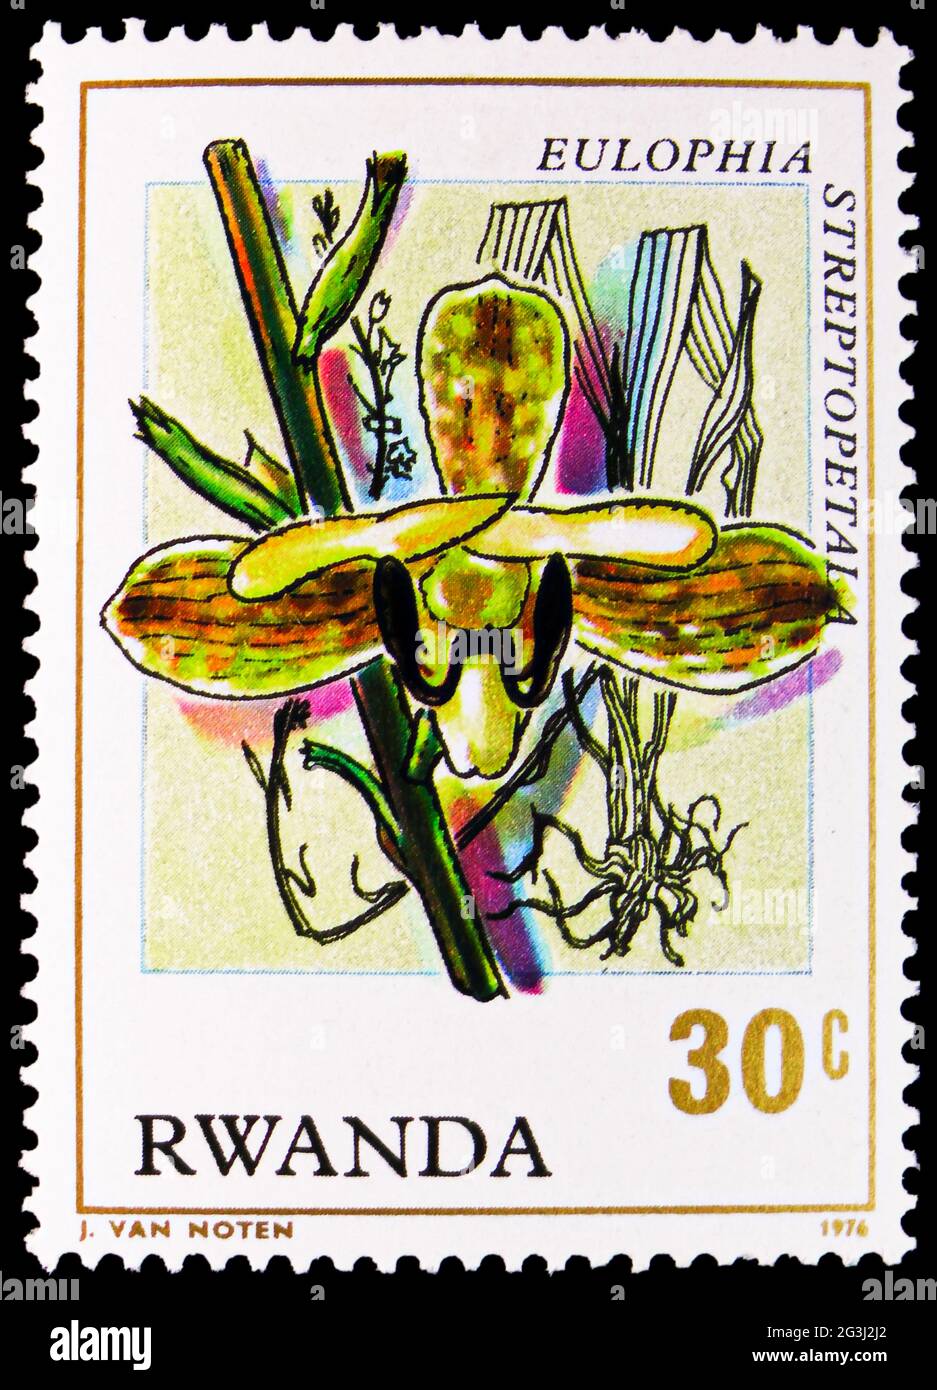 MOSCOW, RUSSIA - APRIL 15, 2021: Postage stamp printed in Rwanda shows Eulophia streptopetala, Orchids serie, circa 1976 Stock Photo